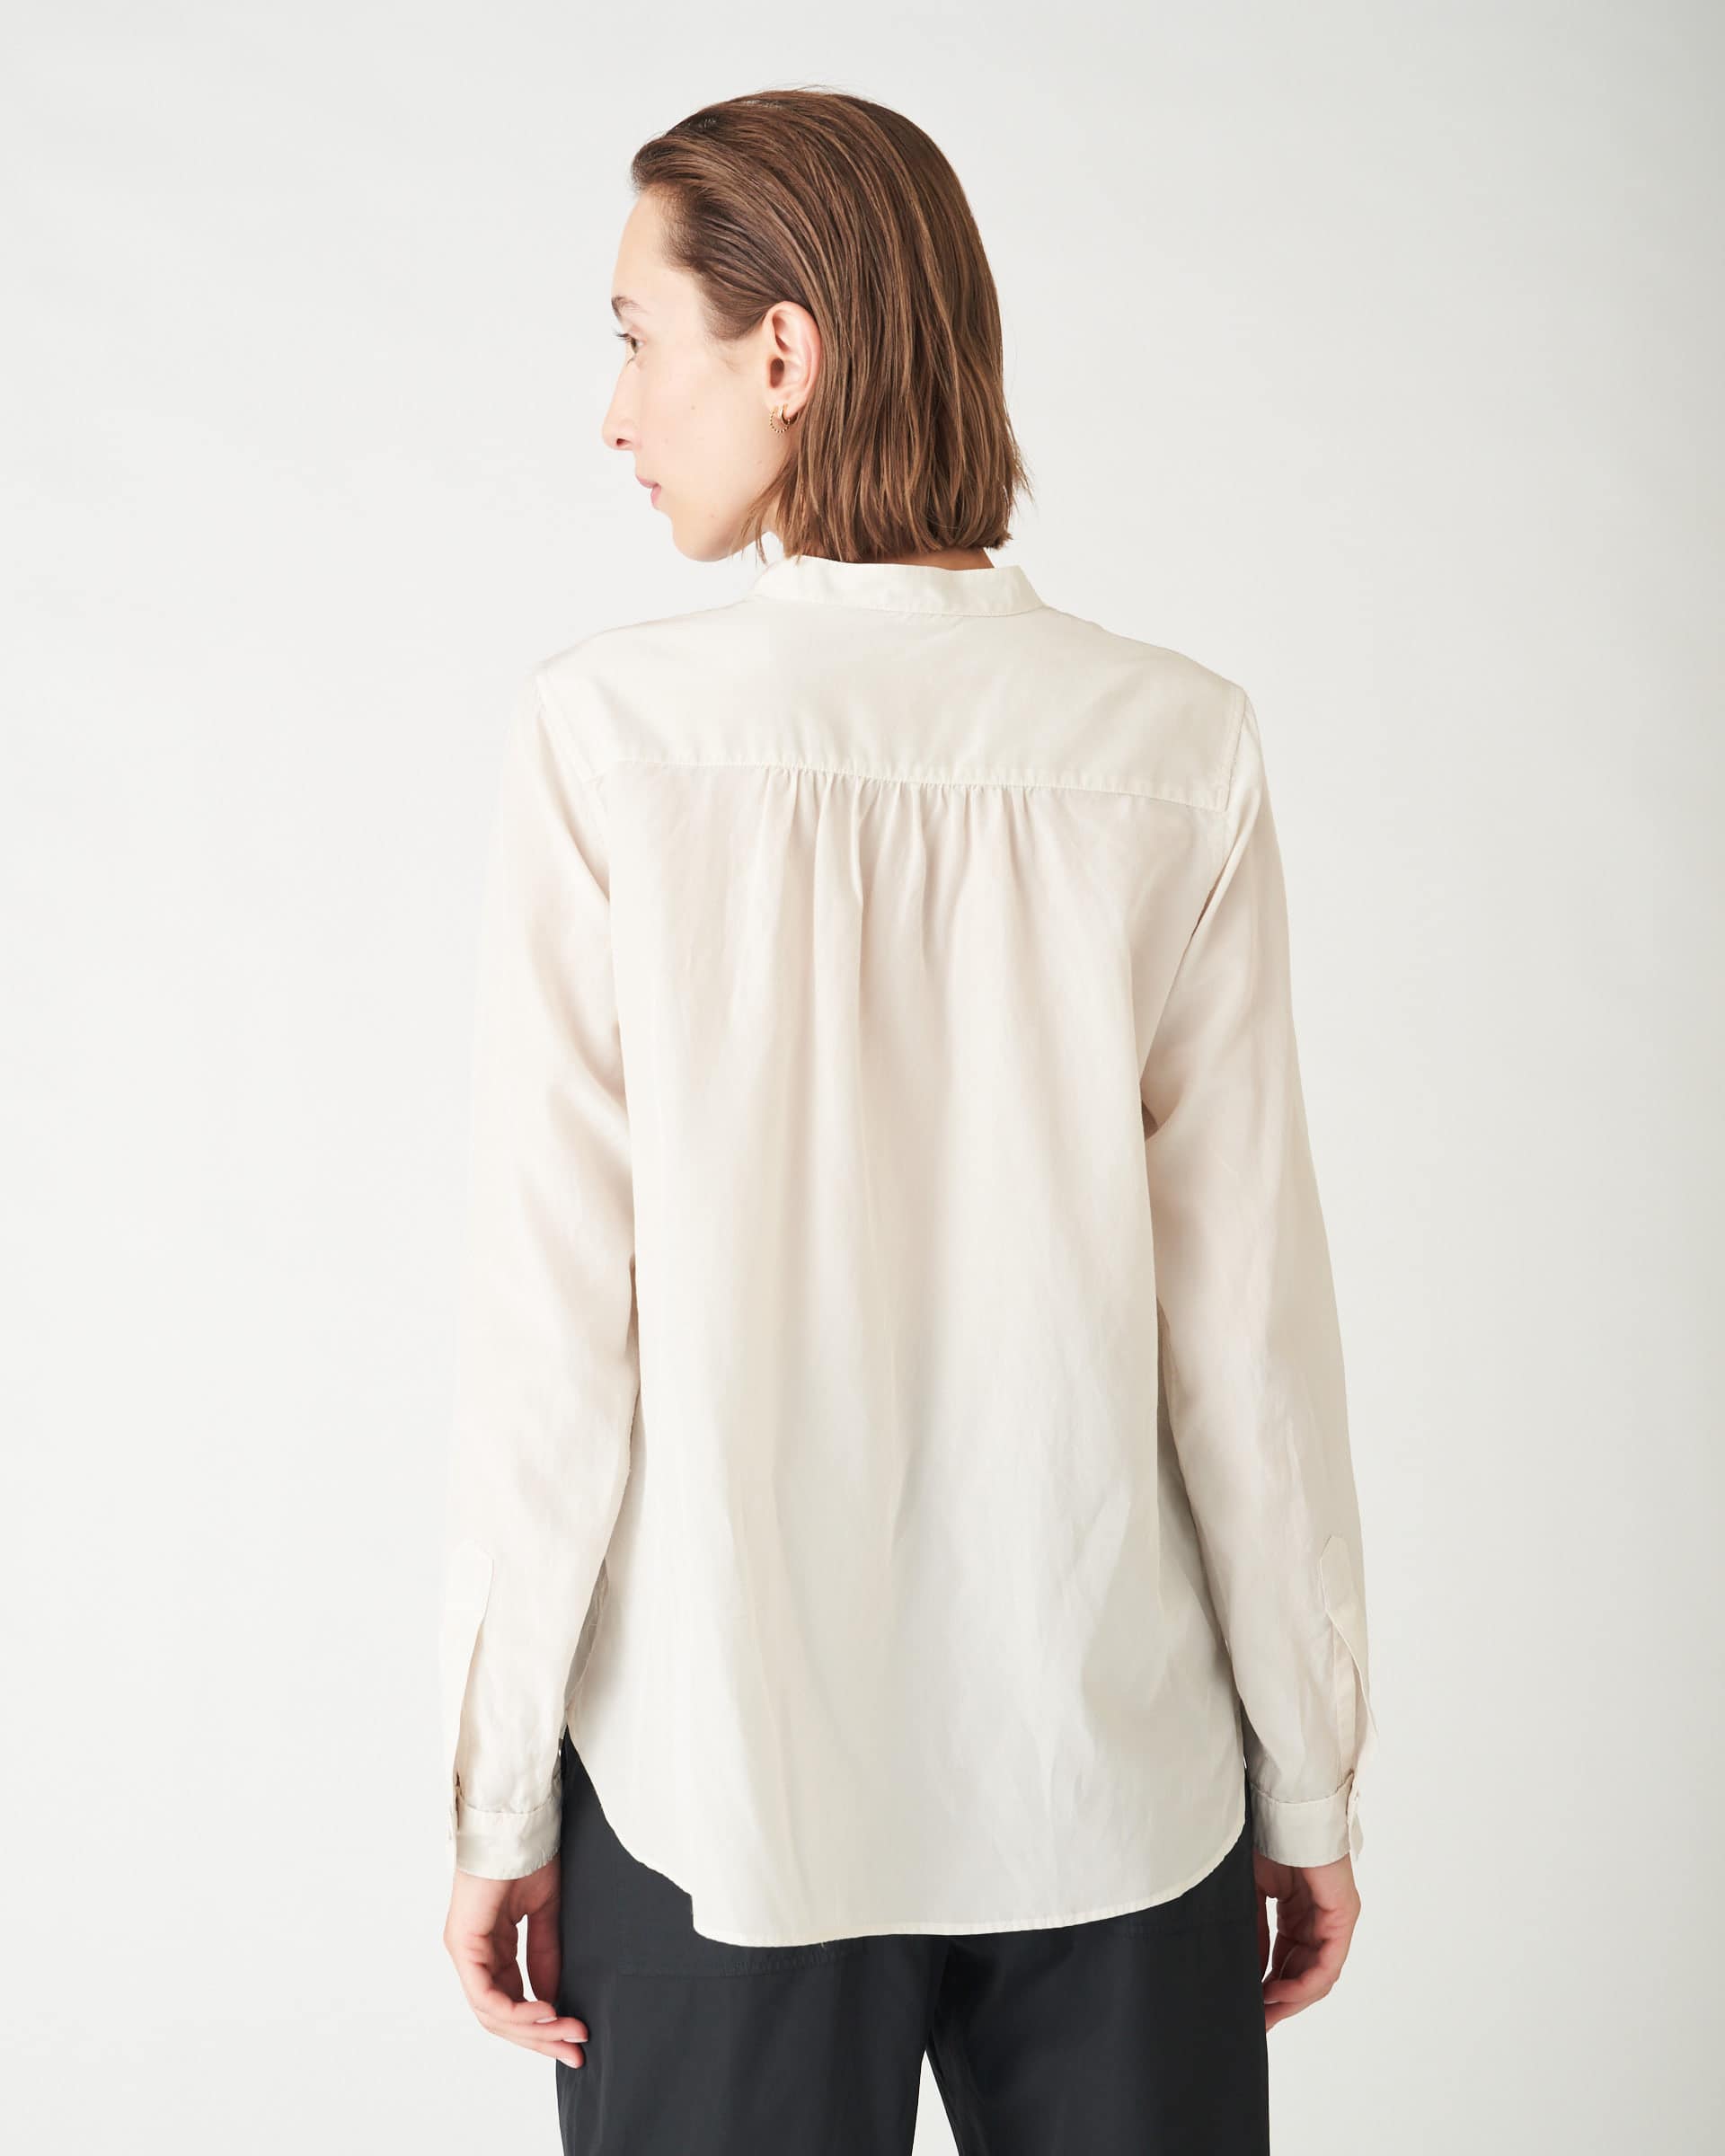 The Market Store | Silk Cotton Soled Shirt